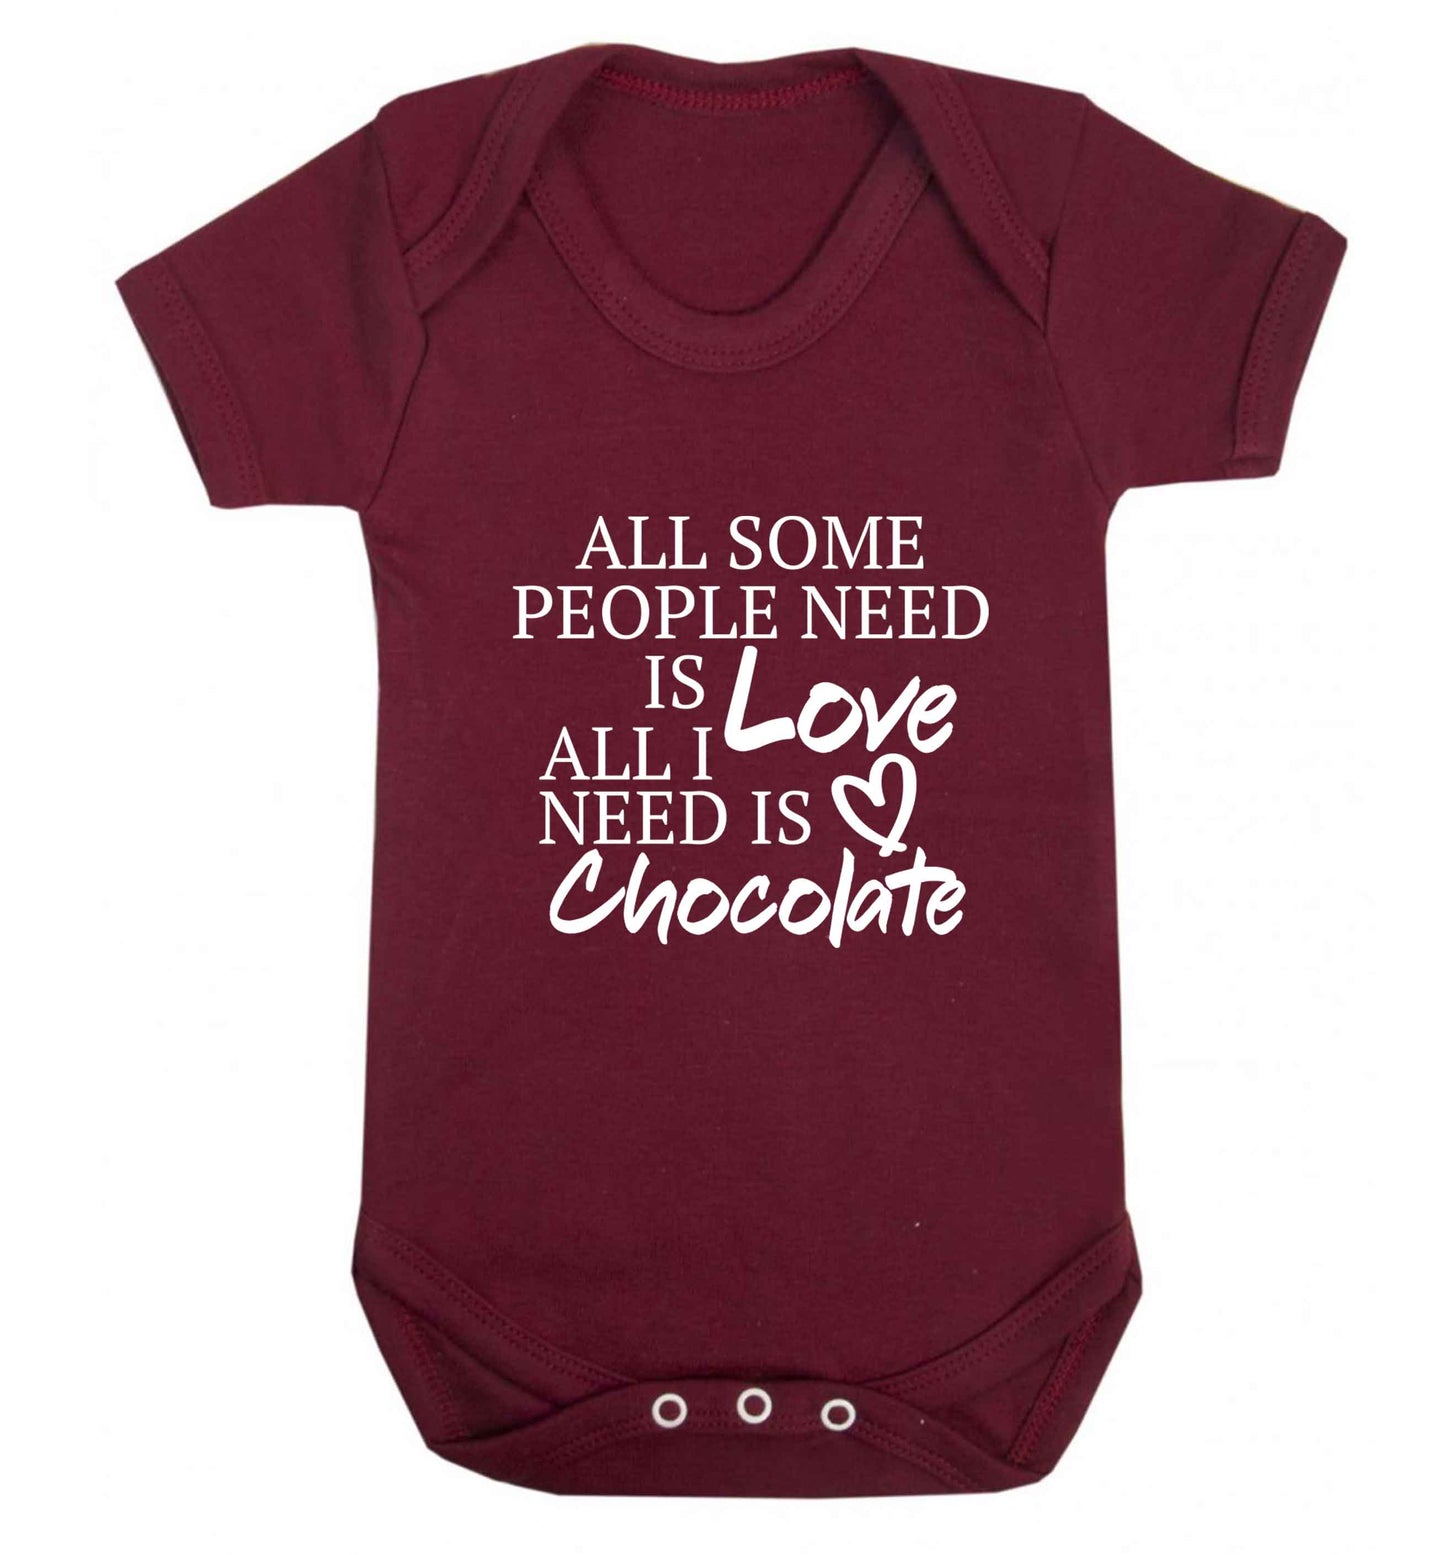 All some people need is love all I need is chocolate baby vest maroon 18-24 months